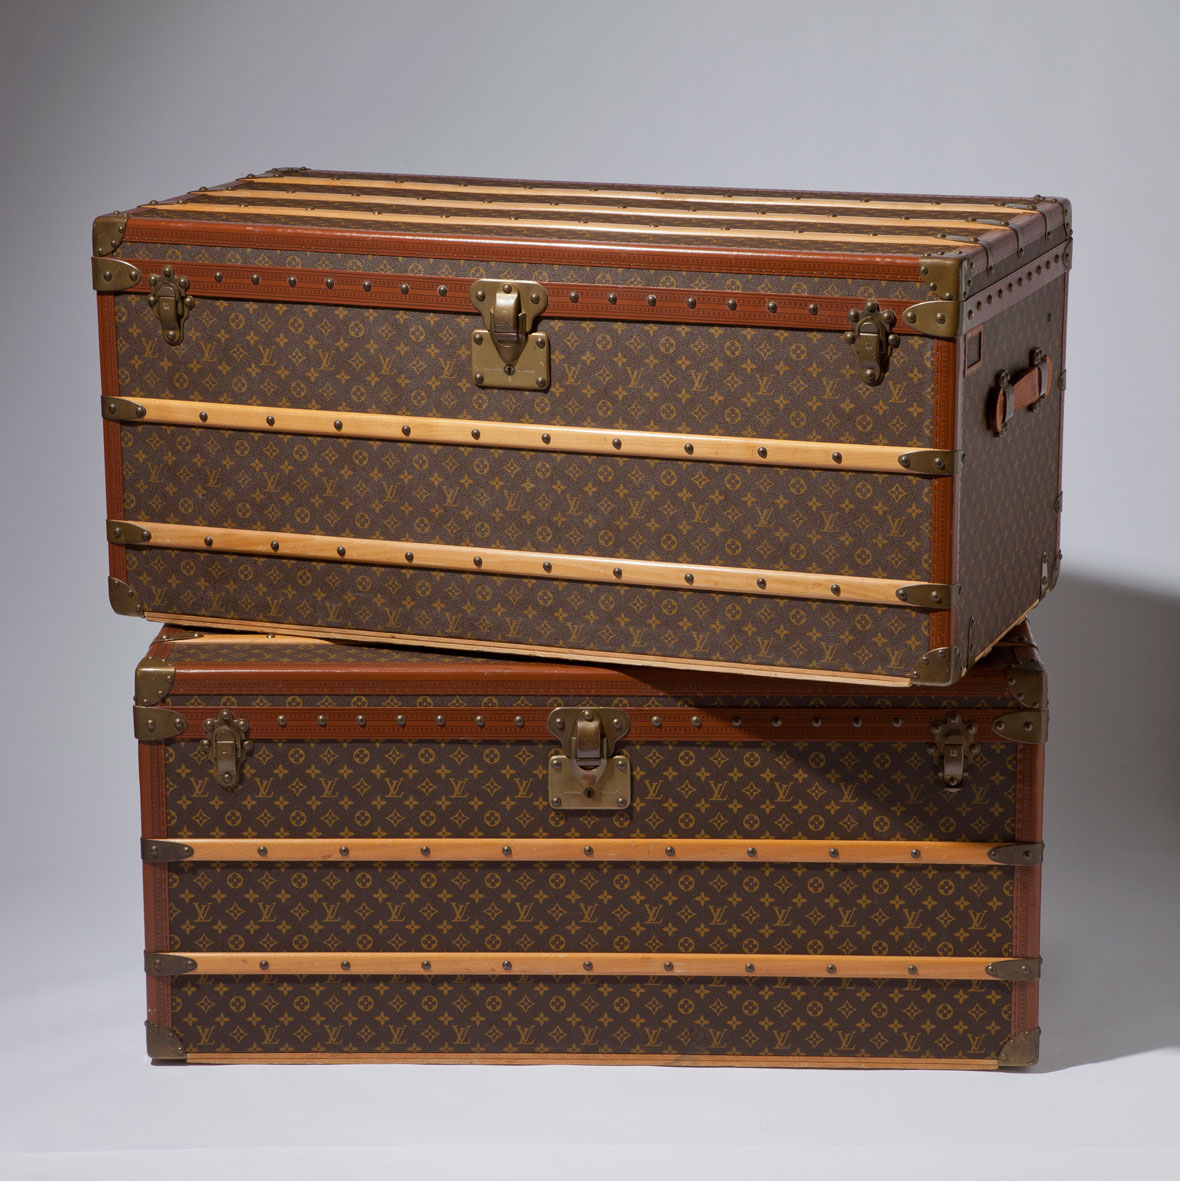 A Louis Vuitton Motoring Trunk Early 20th Century, The Art of Travel, 2019